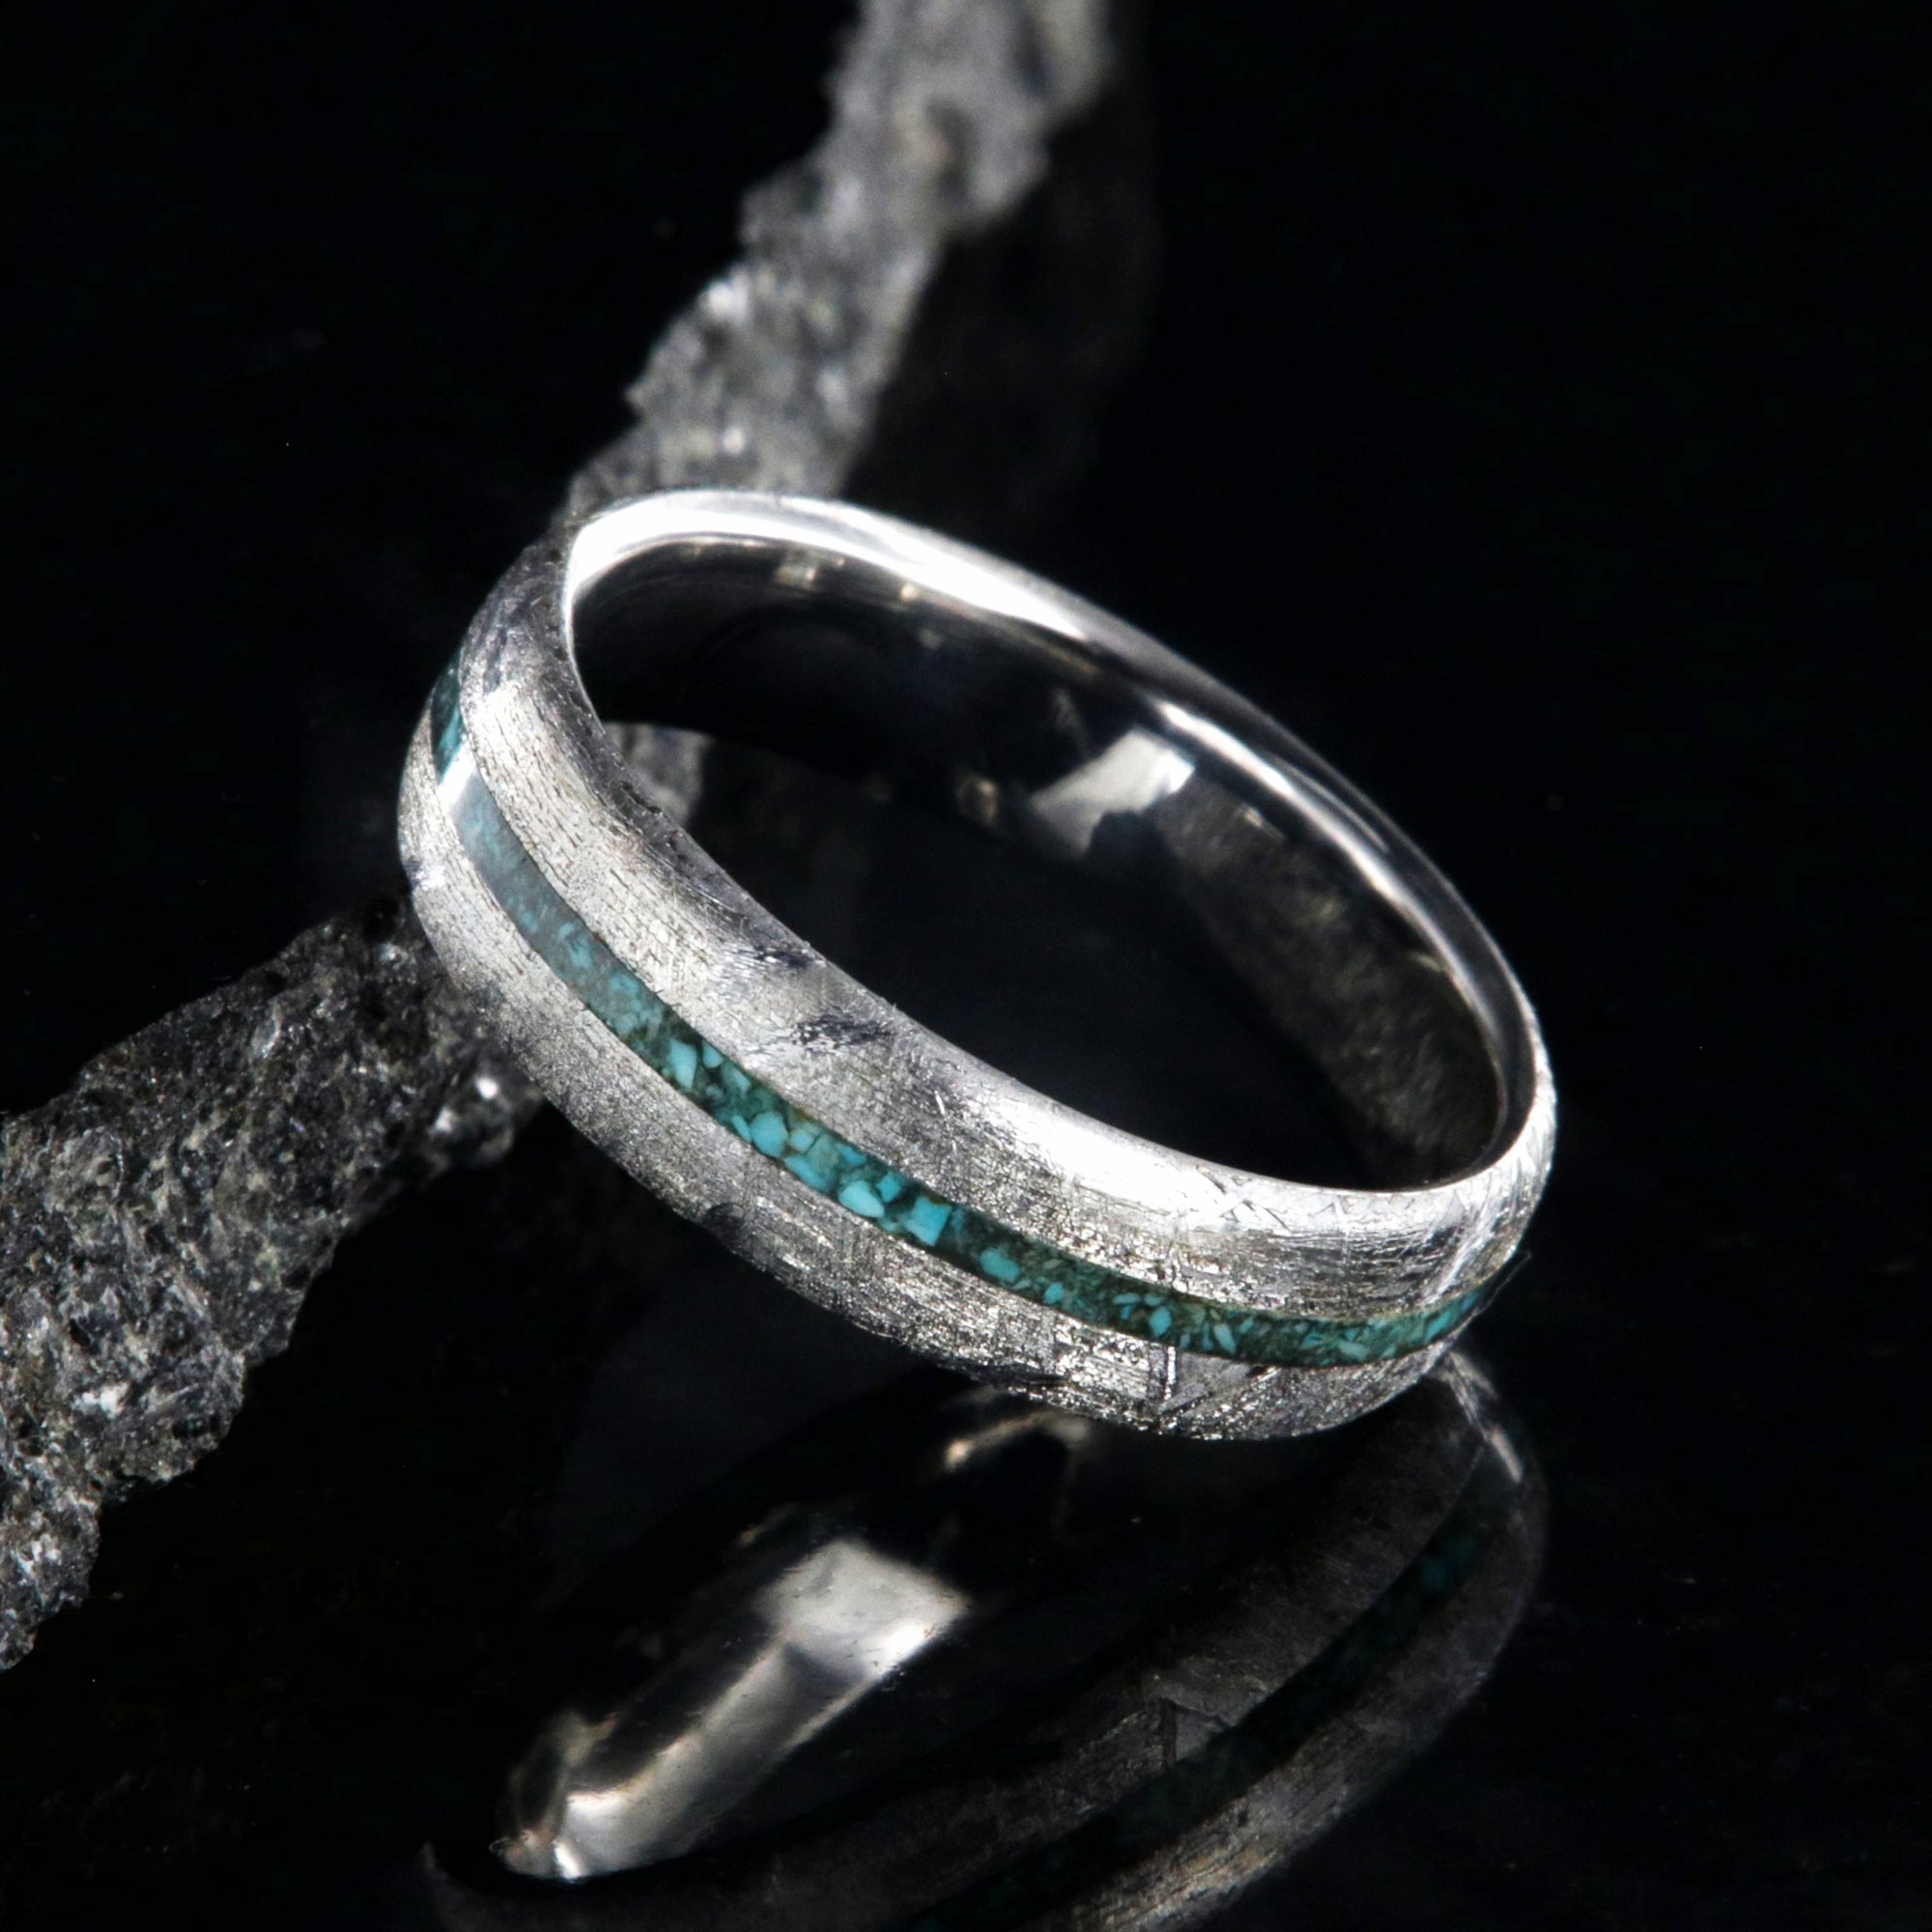 6mm wide meteorite ring with thin center turquoise inlay